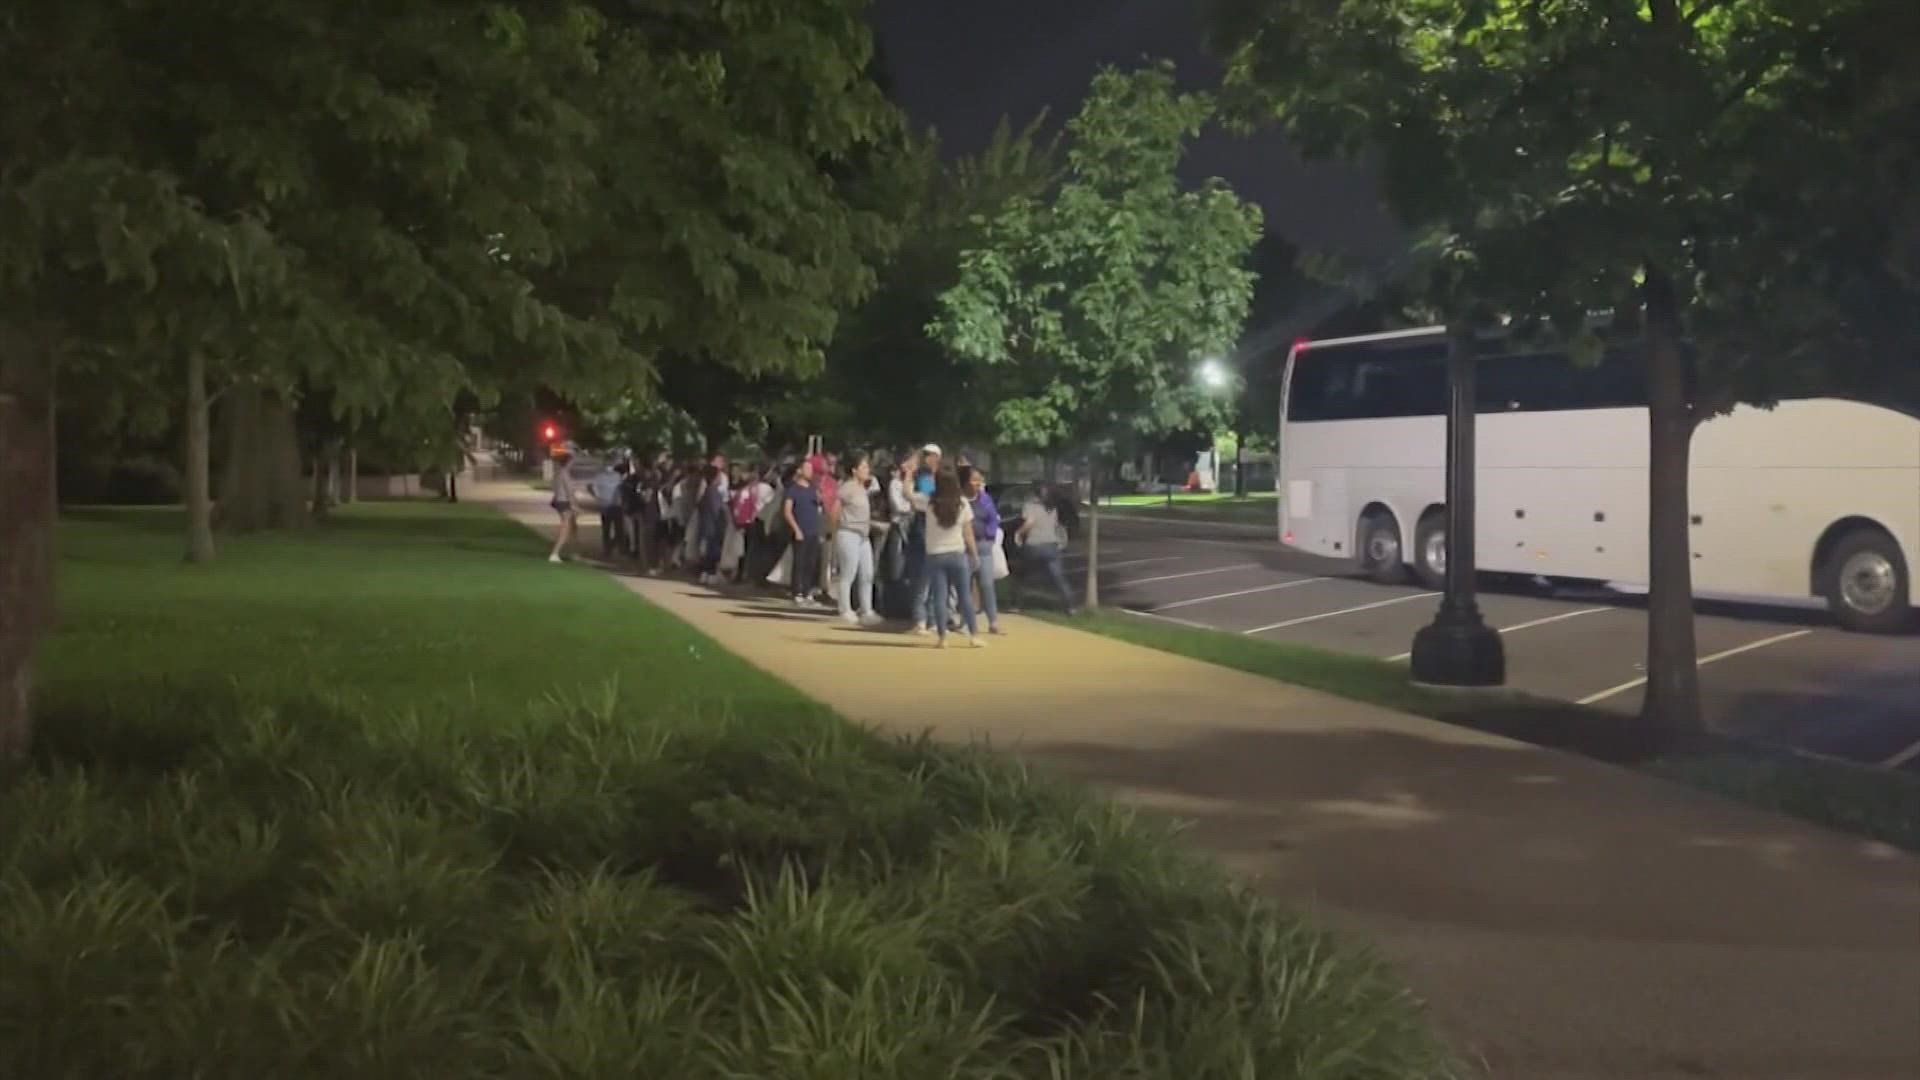 Nearly 9,000 asylum seekers were bussed to D.C. from Texas and Arizona since April.